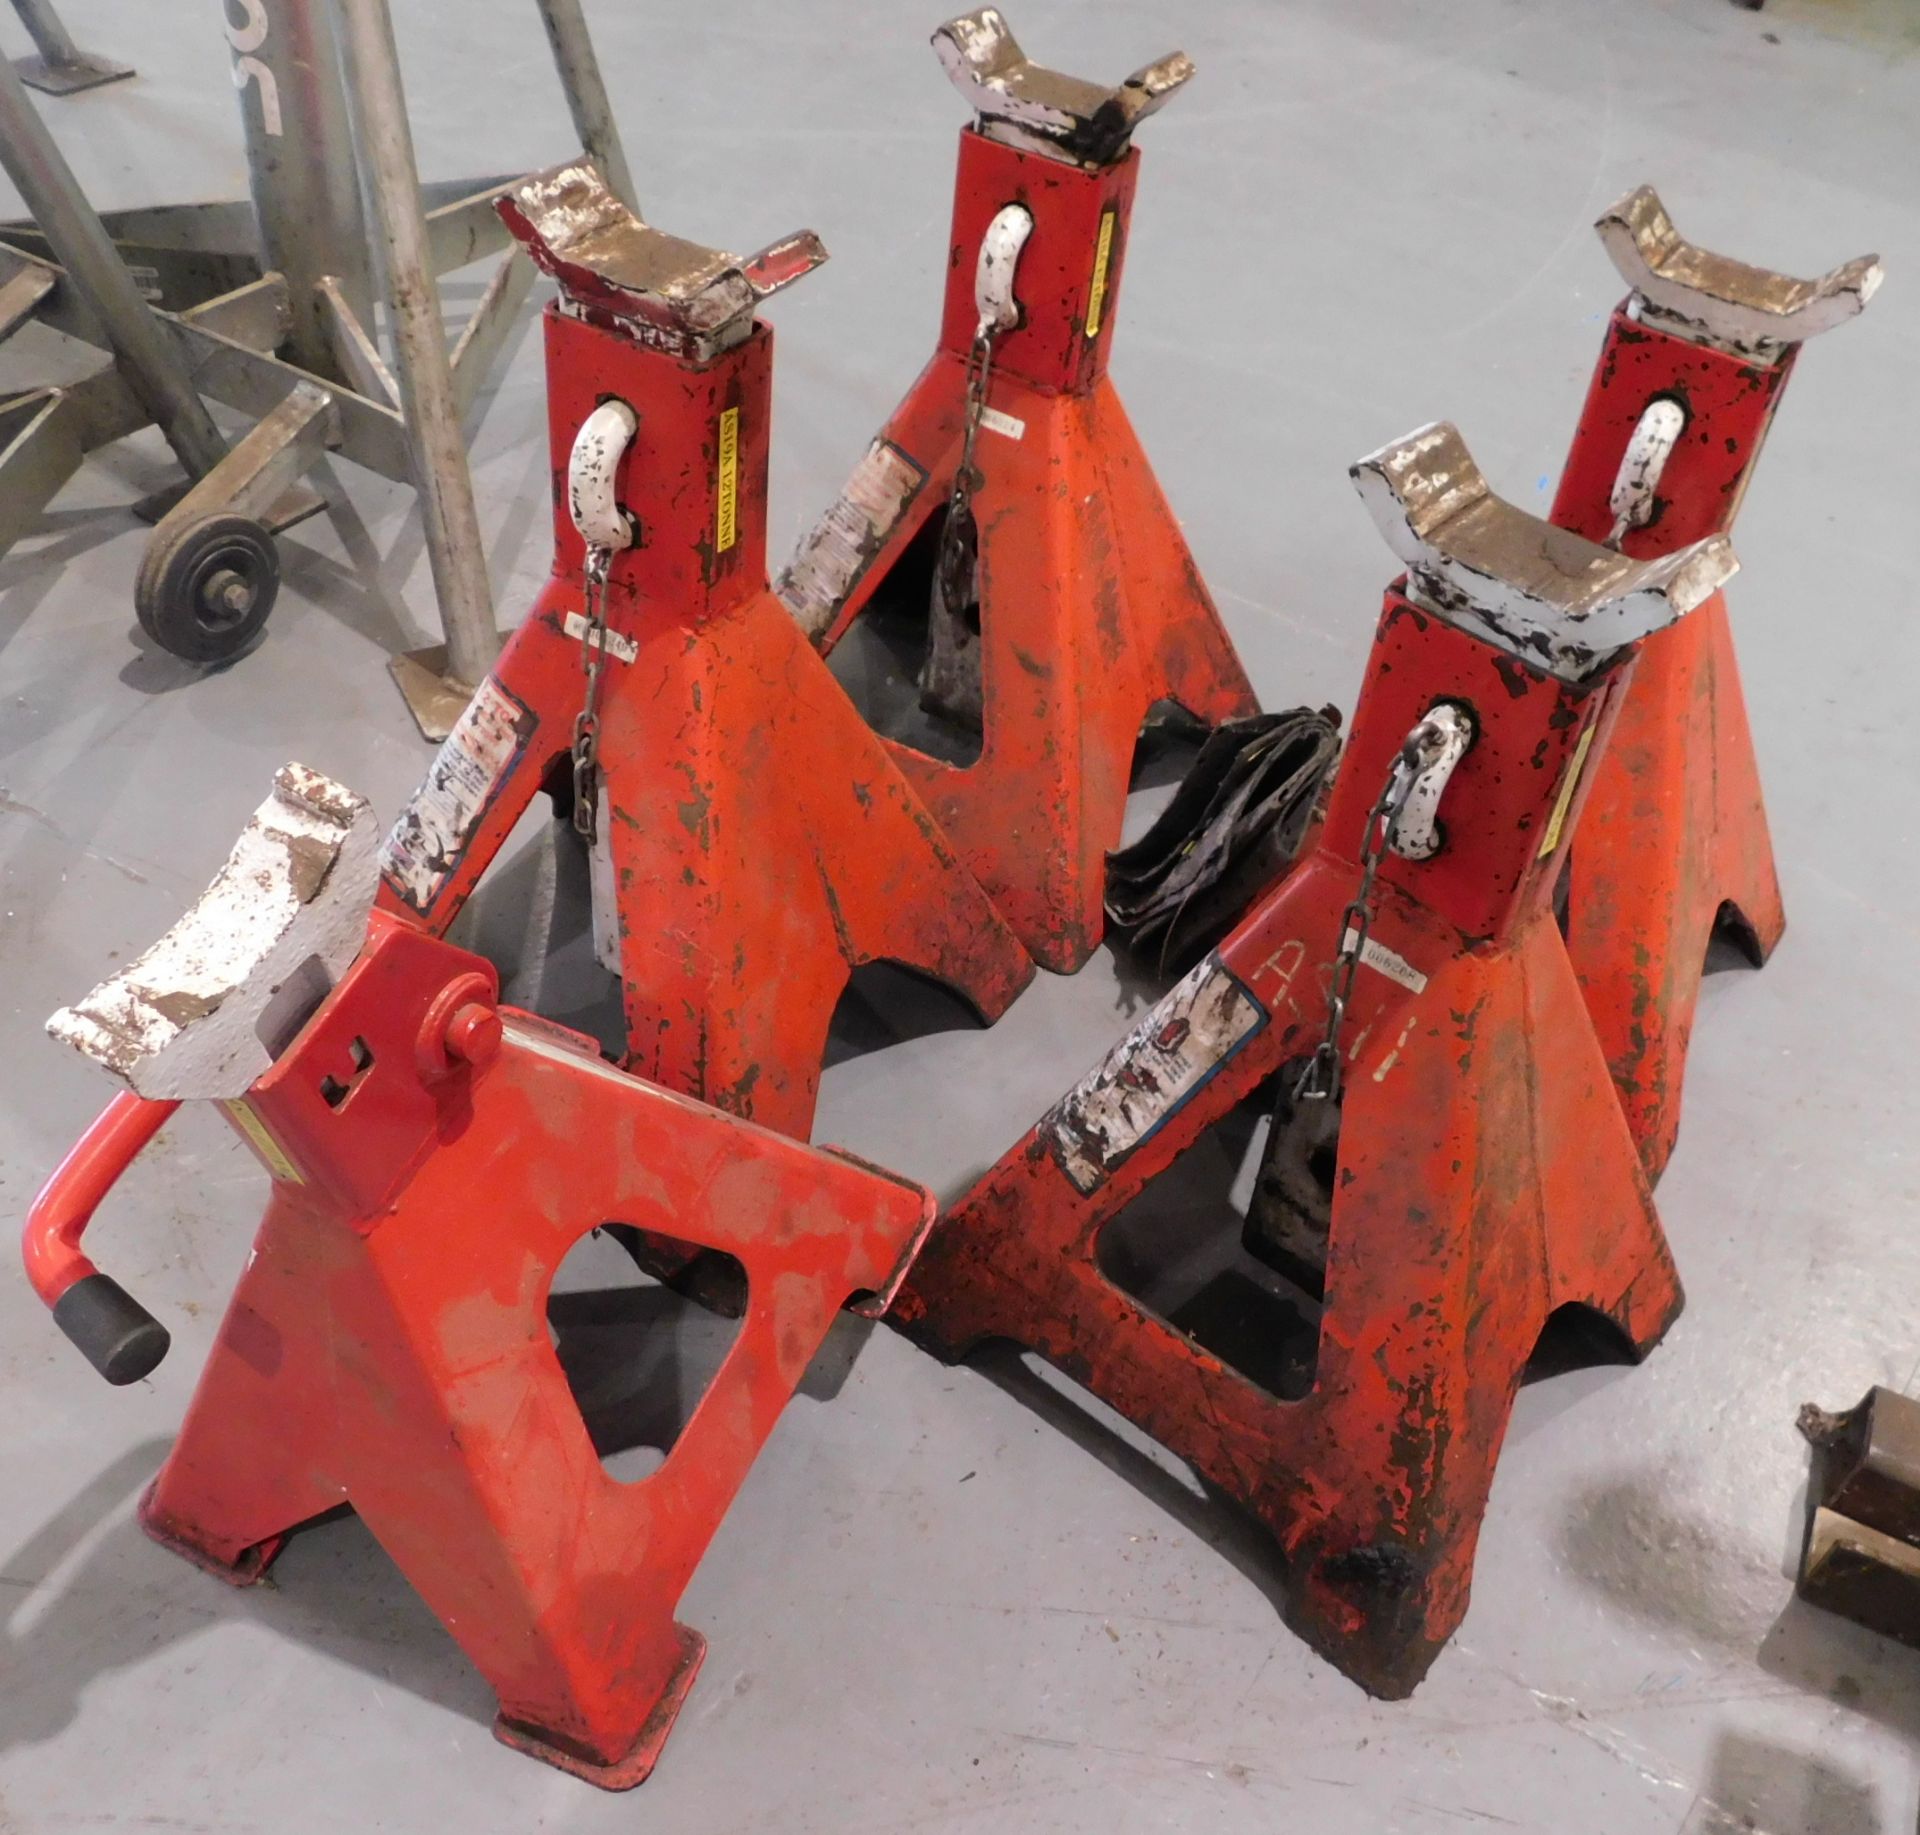 5 Sealey Axle Stands (4x12t & 1x6t) (Located Rugby. Please Refer to General Notes) - Image 3 of 3